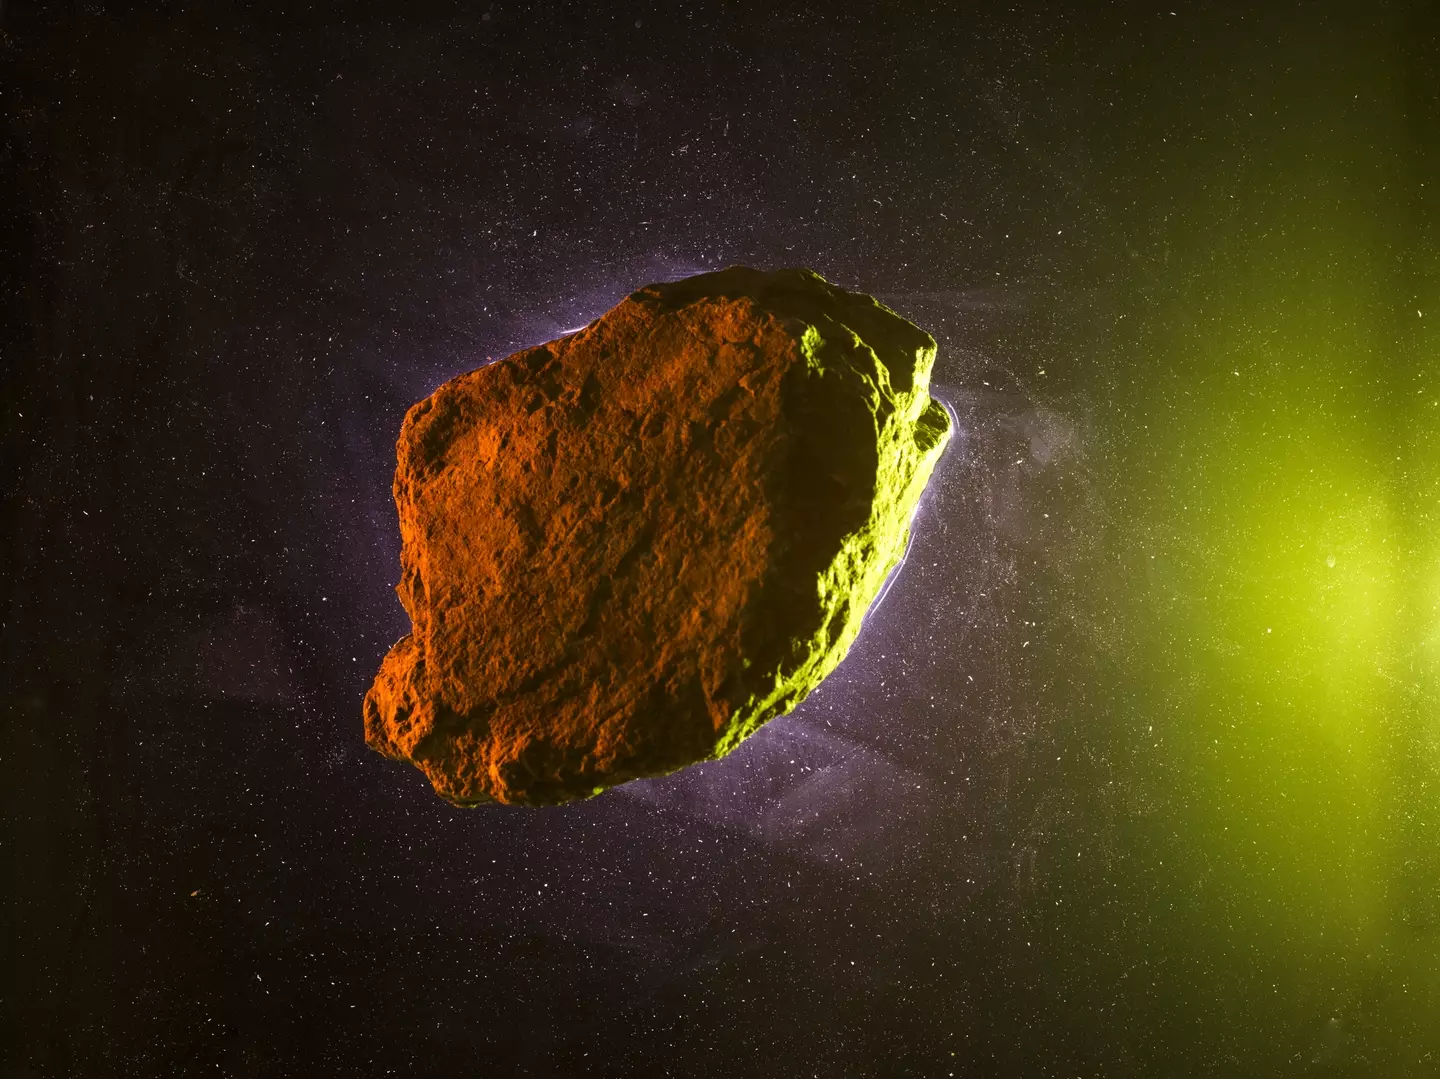 An asteroid is a rocky object - thought to consist of clay, silicate rocks, and nickel-iron. (Getty Stock Image)